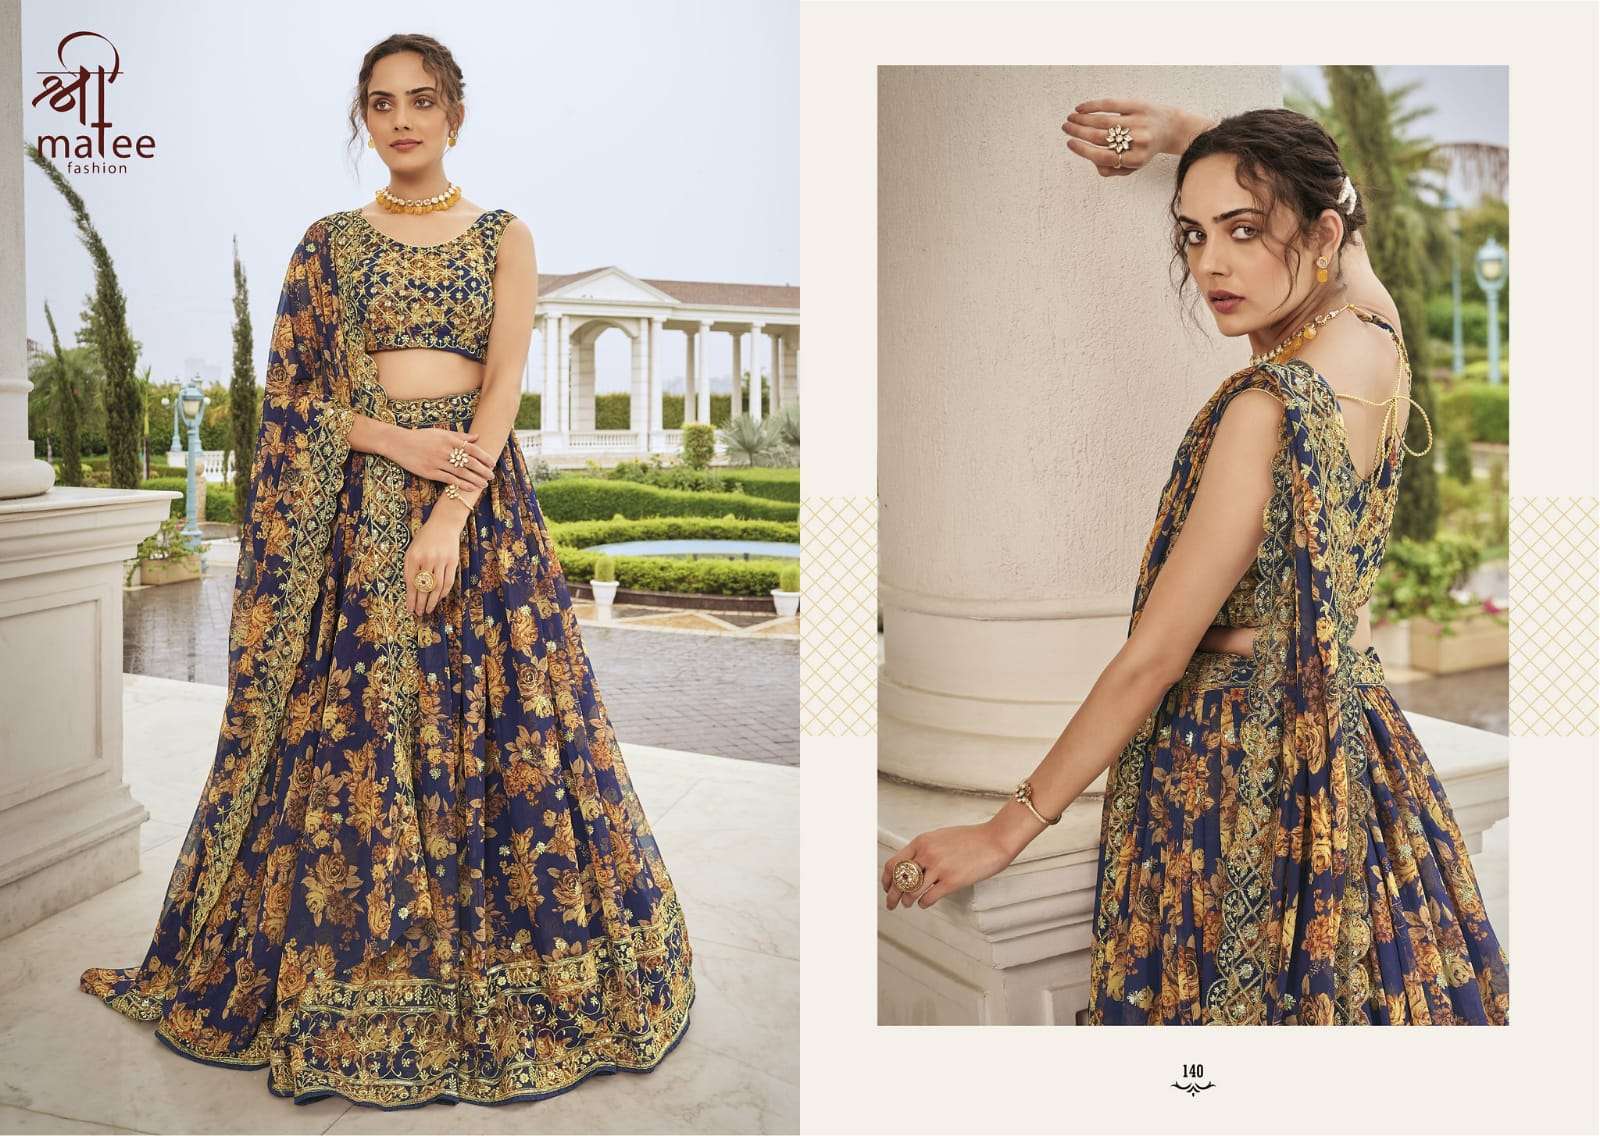 Shiyahi By Shree Matee Fashion 137 To 140 Series Bridal Wear Collection Beautiful Stylish Colorful Fancy Party Wear & Occasional Wear Faux Georgette Lehengas At Wholesale Price